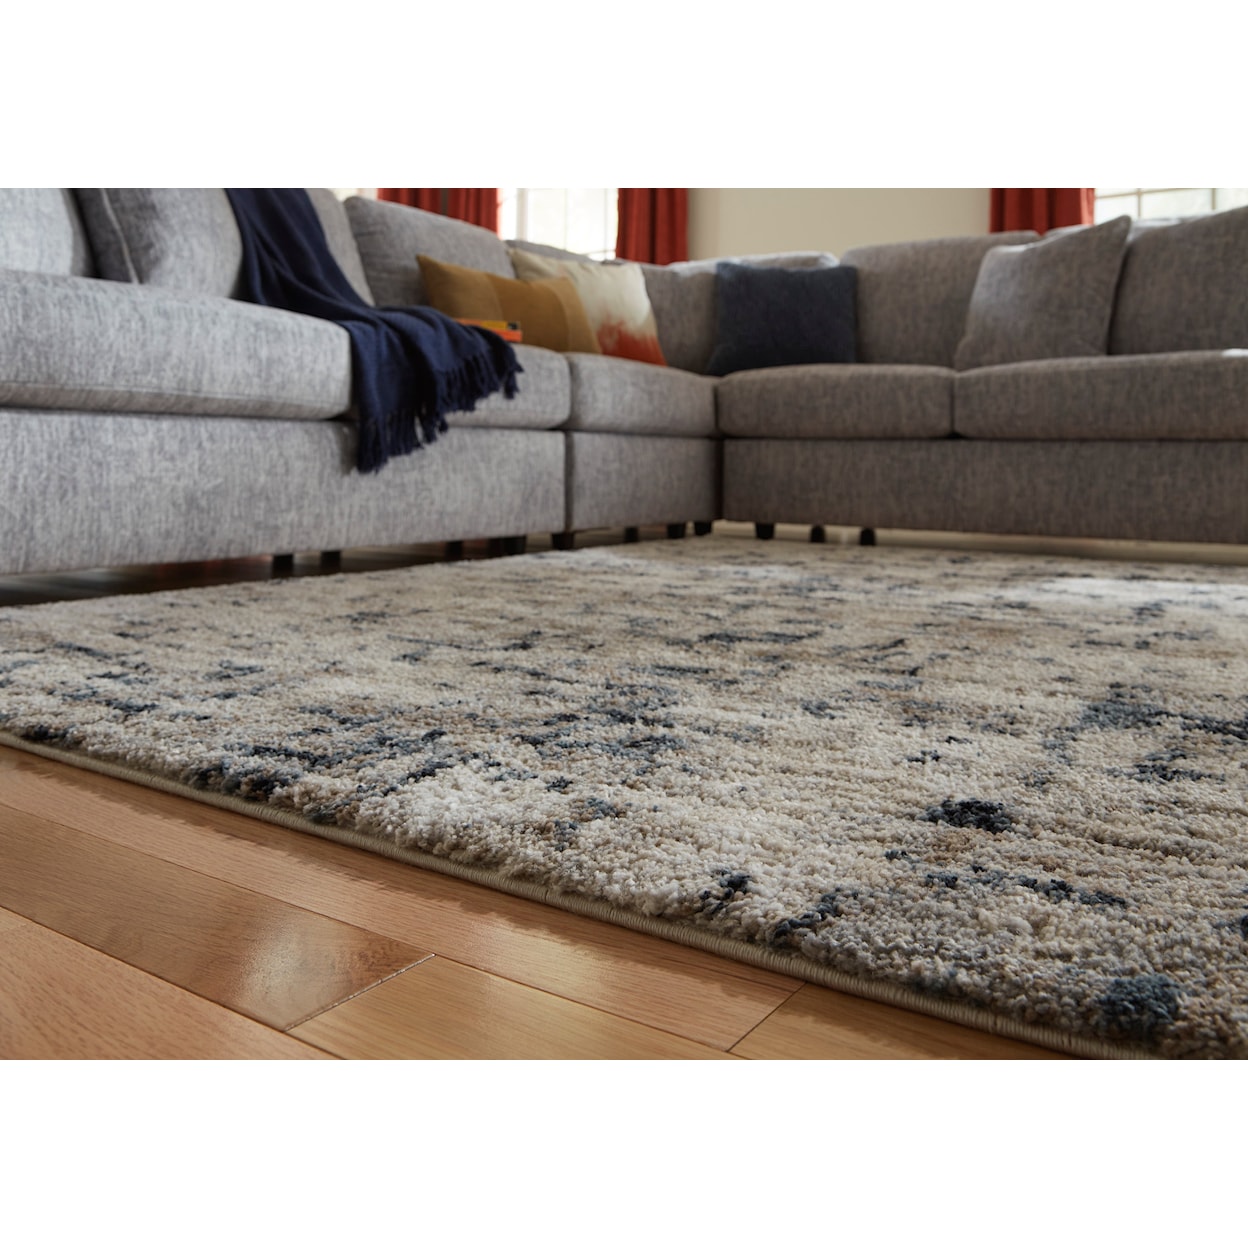 Benchcraft Contemporary Area Rugs Mansville 5'3" x 7' Rug